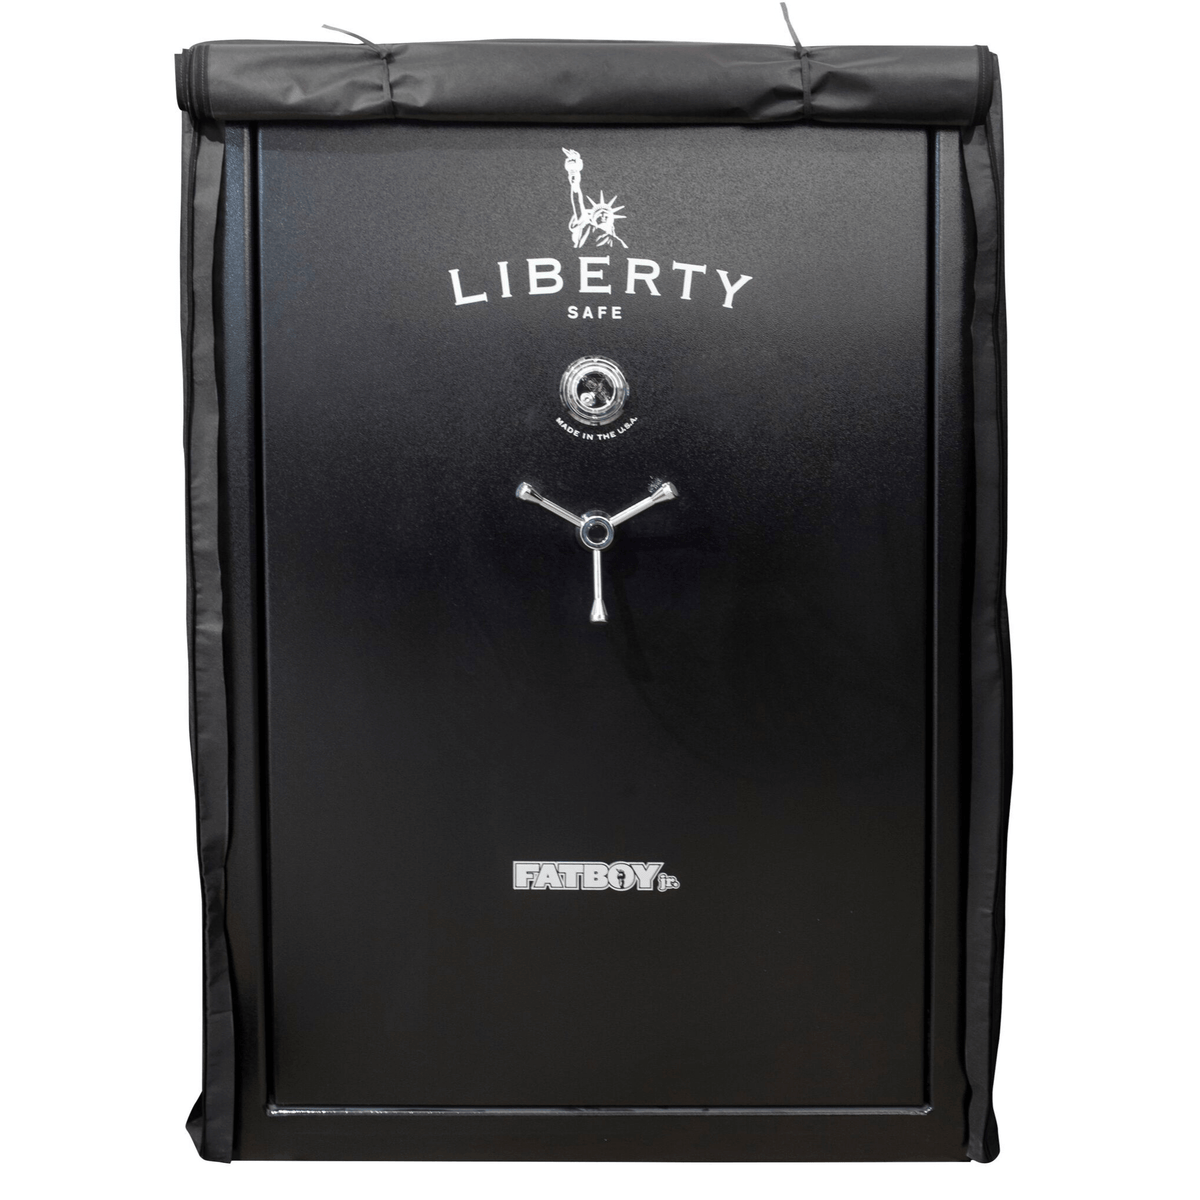 Accessory - Security - Safe Cover - 48 size safes